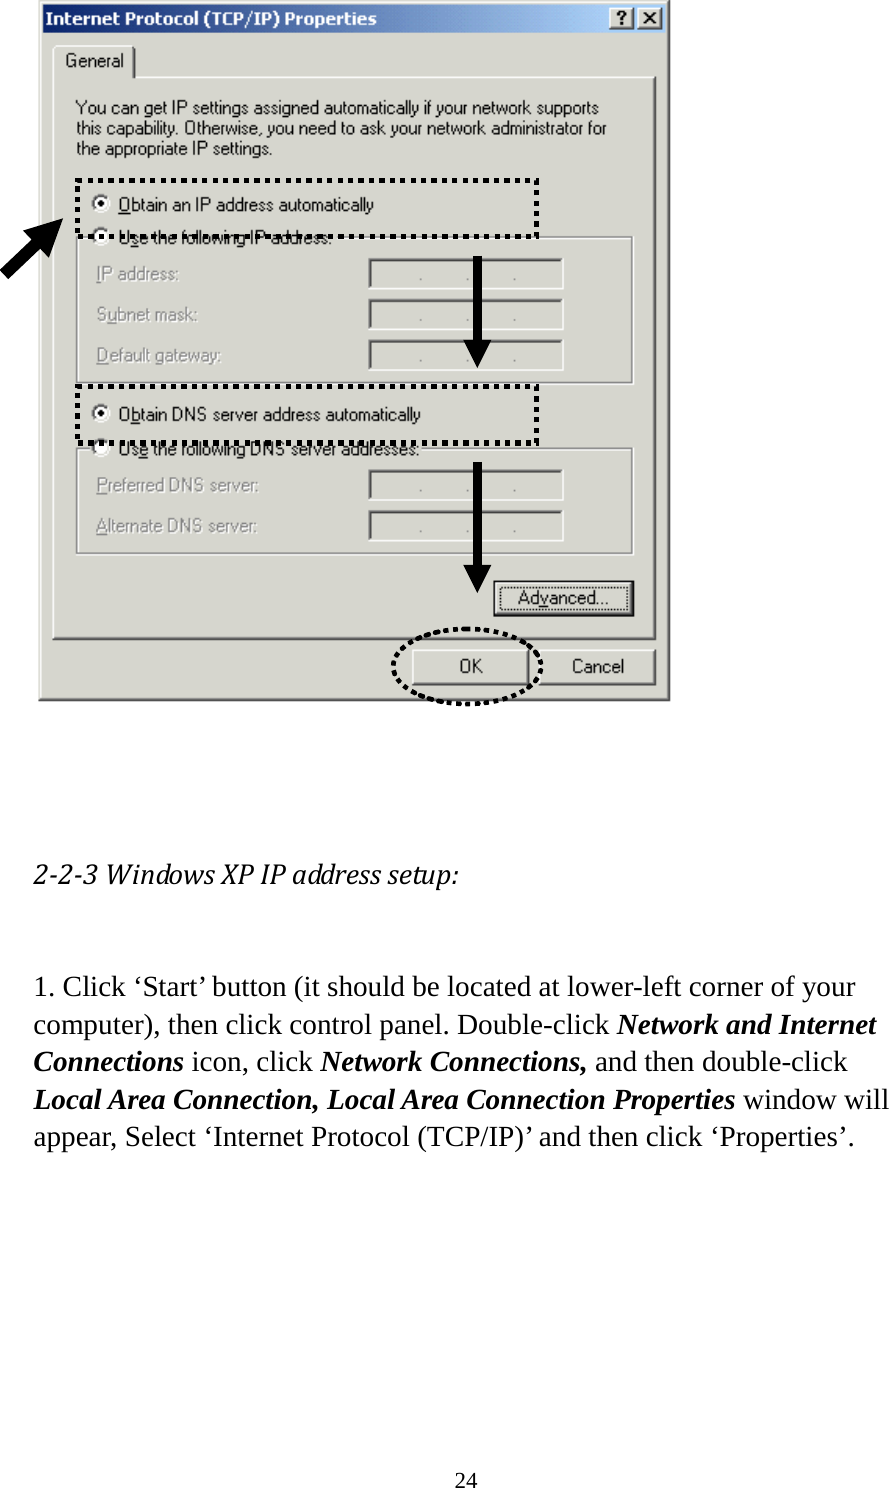 24     2-2-3 Windows XP IP address setup:  1. Click ‘Start’ button (it should be located at lower-left corner of your computer), then click control panel. Double-click Network and Internet Connections icon, click Network Connections, and then double-click Local Area Connection, Local Area Connection Properties window will appear, Select ‘Internet Protocol (TCP/IP)’ and then click ‘Properties’.  